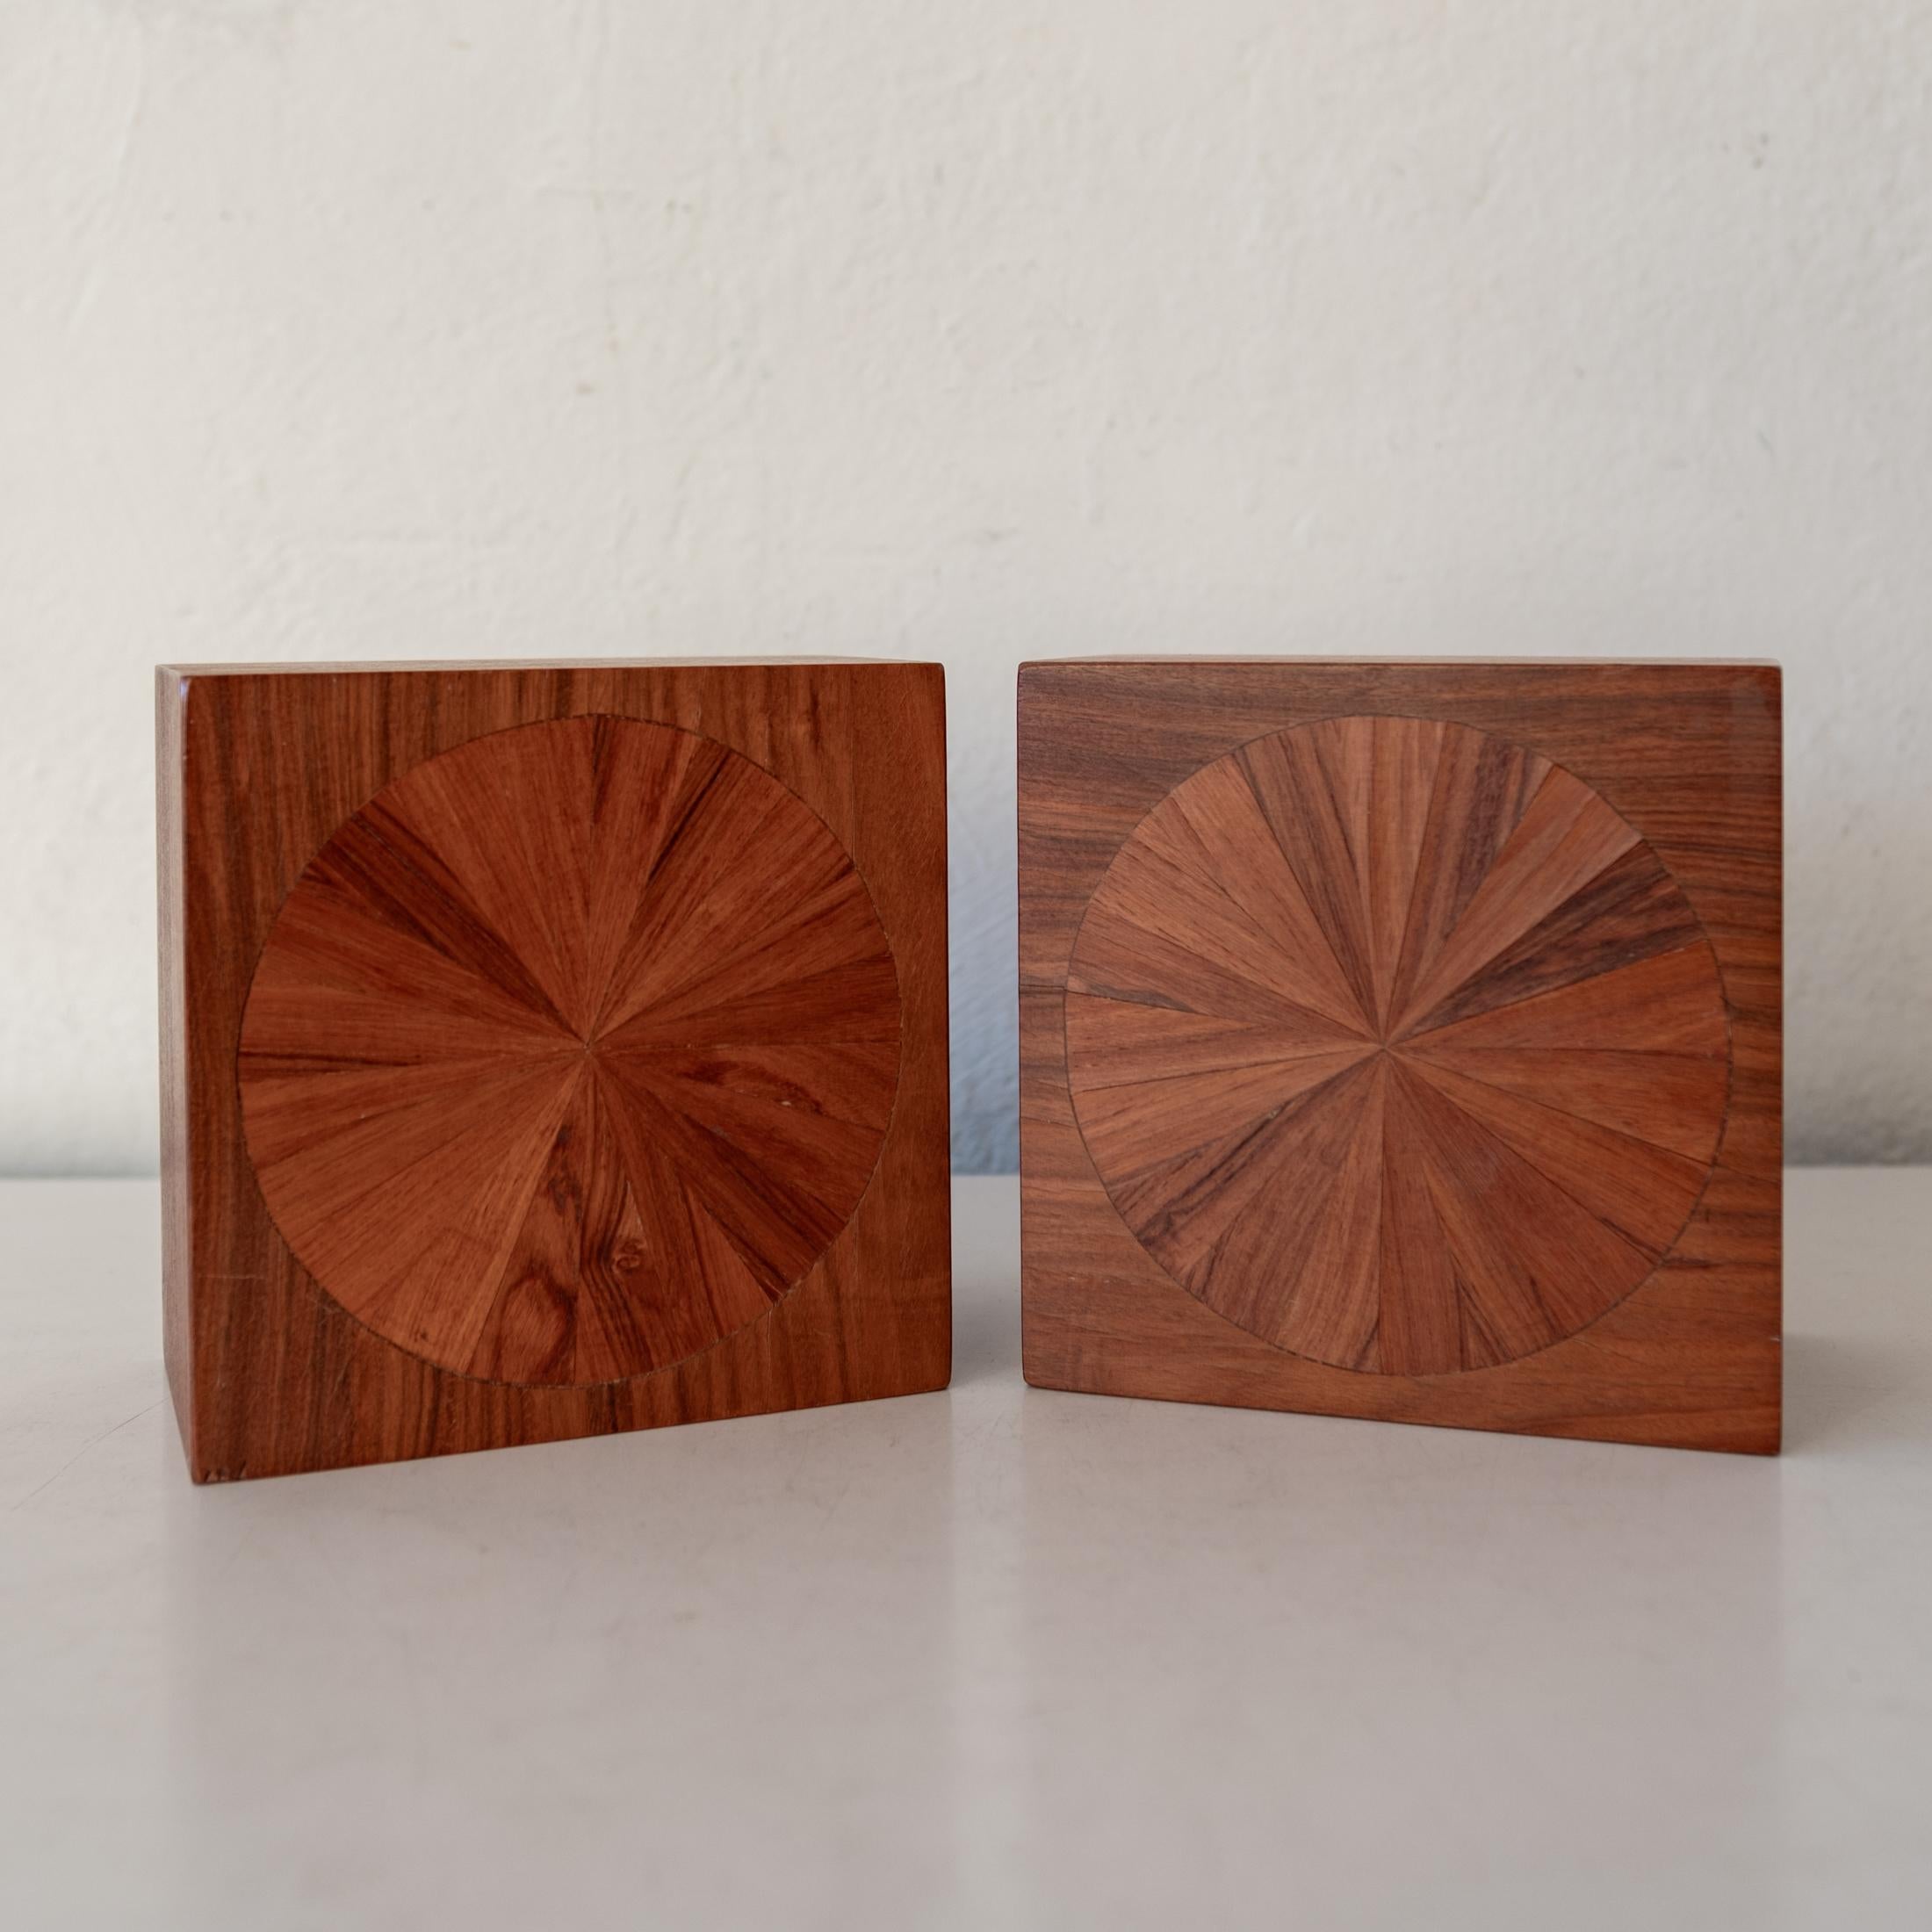 A pair of bookends by Jere Osgood. Handcrafted with incredible detail and marquetry. 

This particular design was sold through the American Craft Council's gallery,  America House (see catalog page). The shop operated from the 1940's to 1970s in New